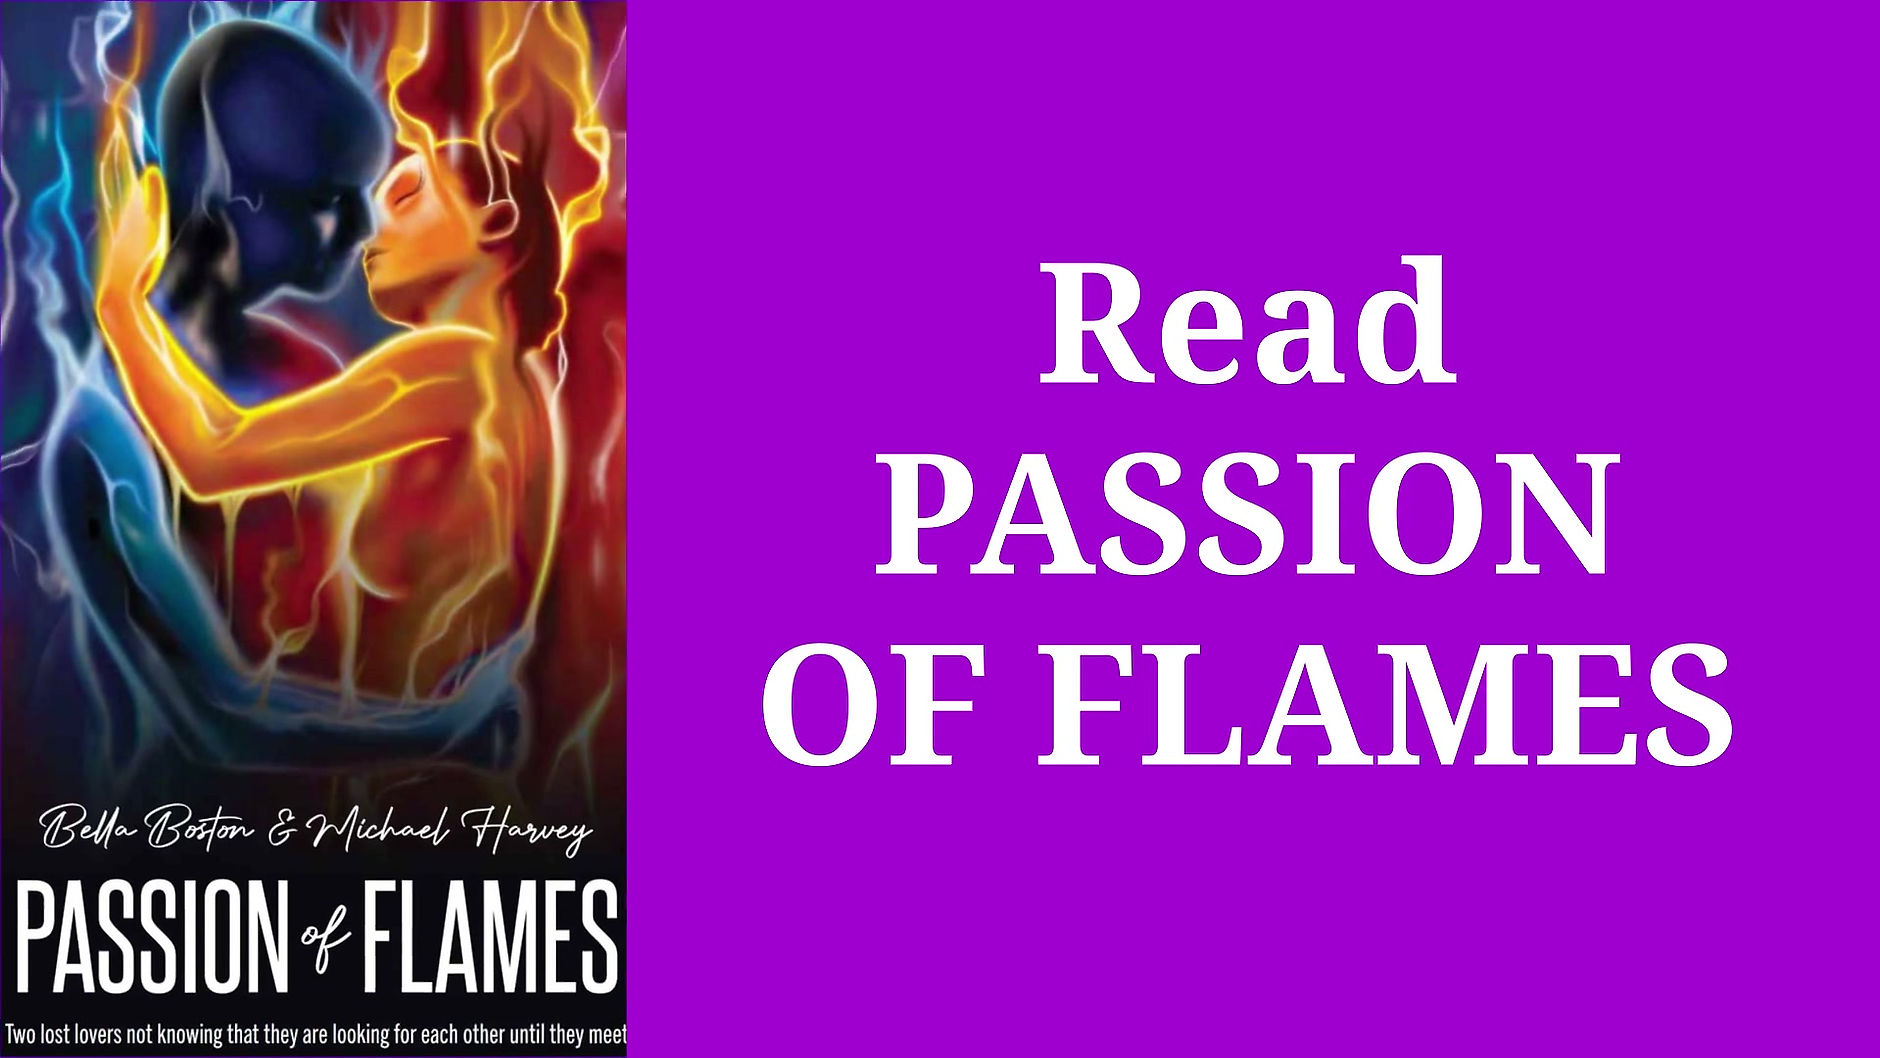 Passion of Flames video